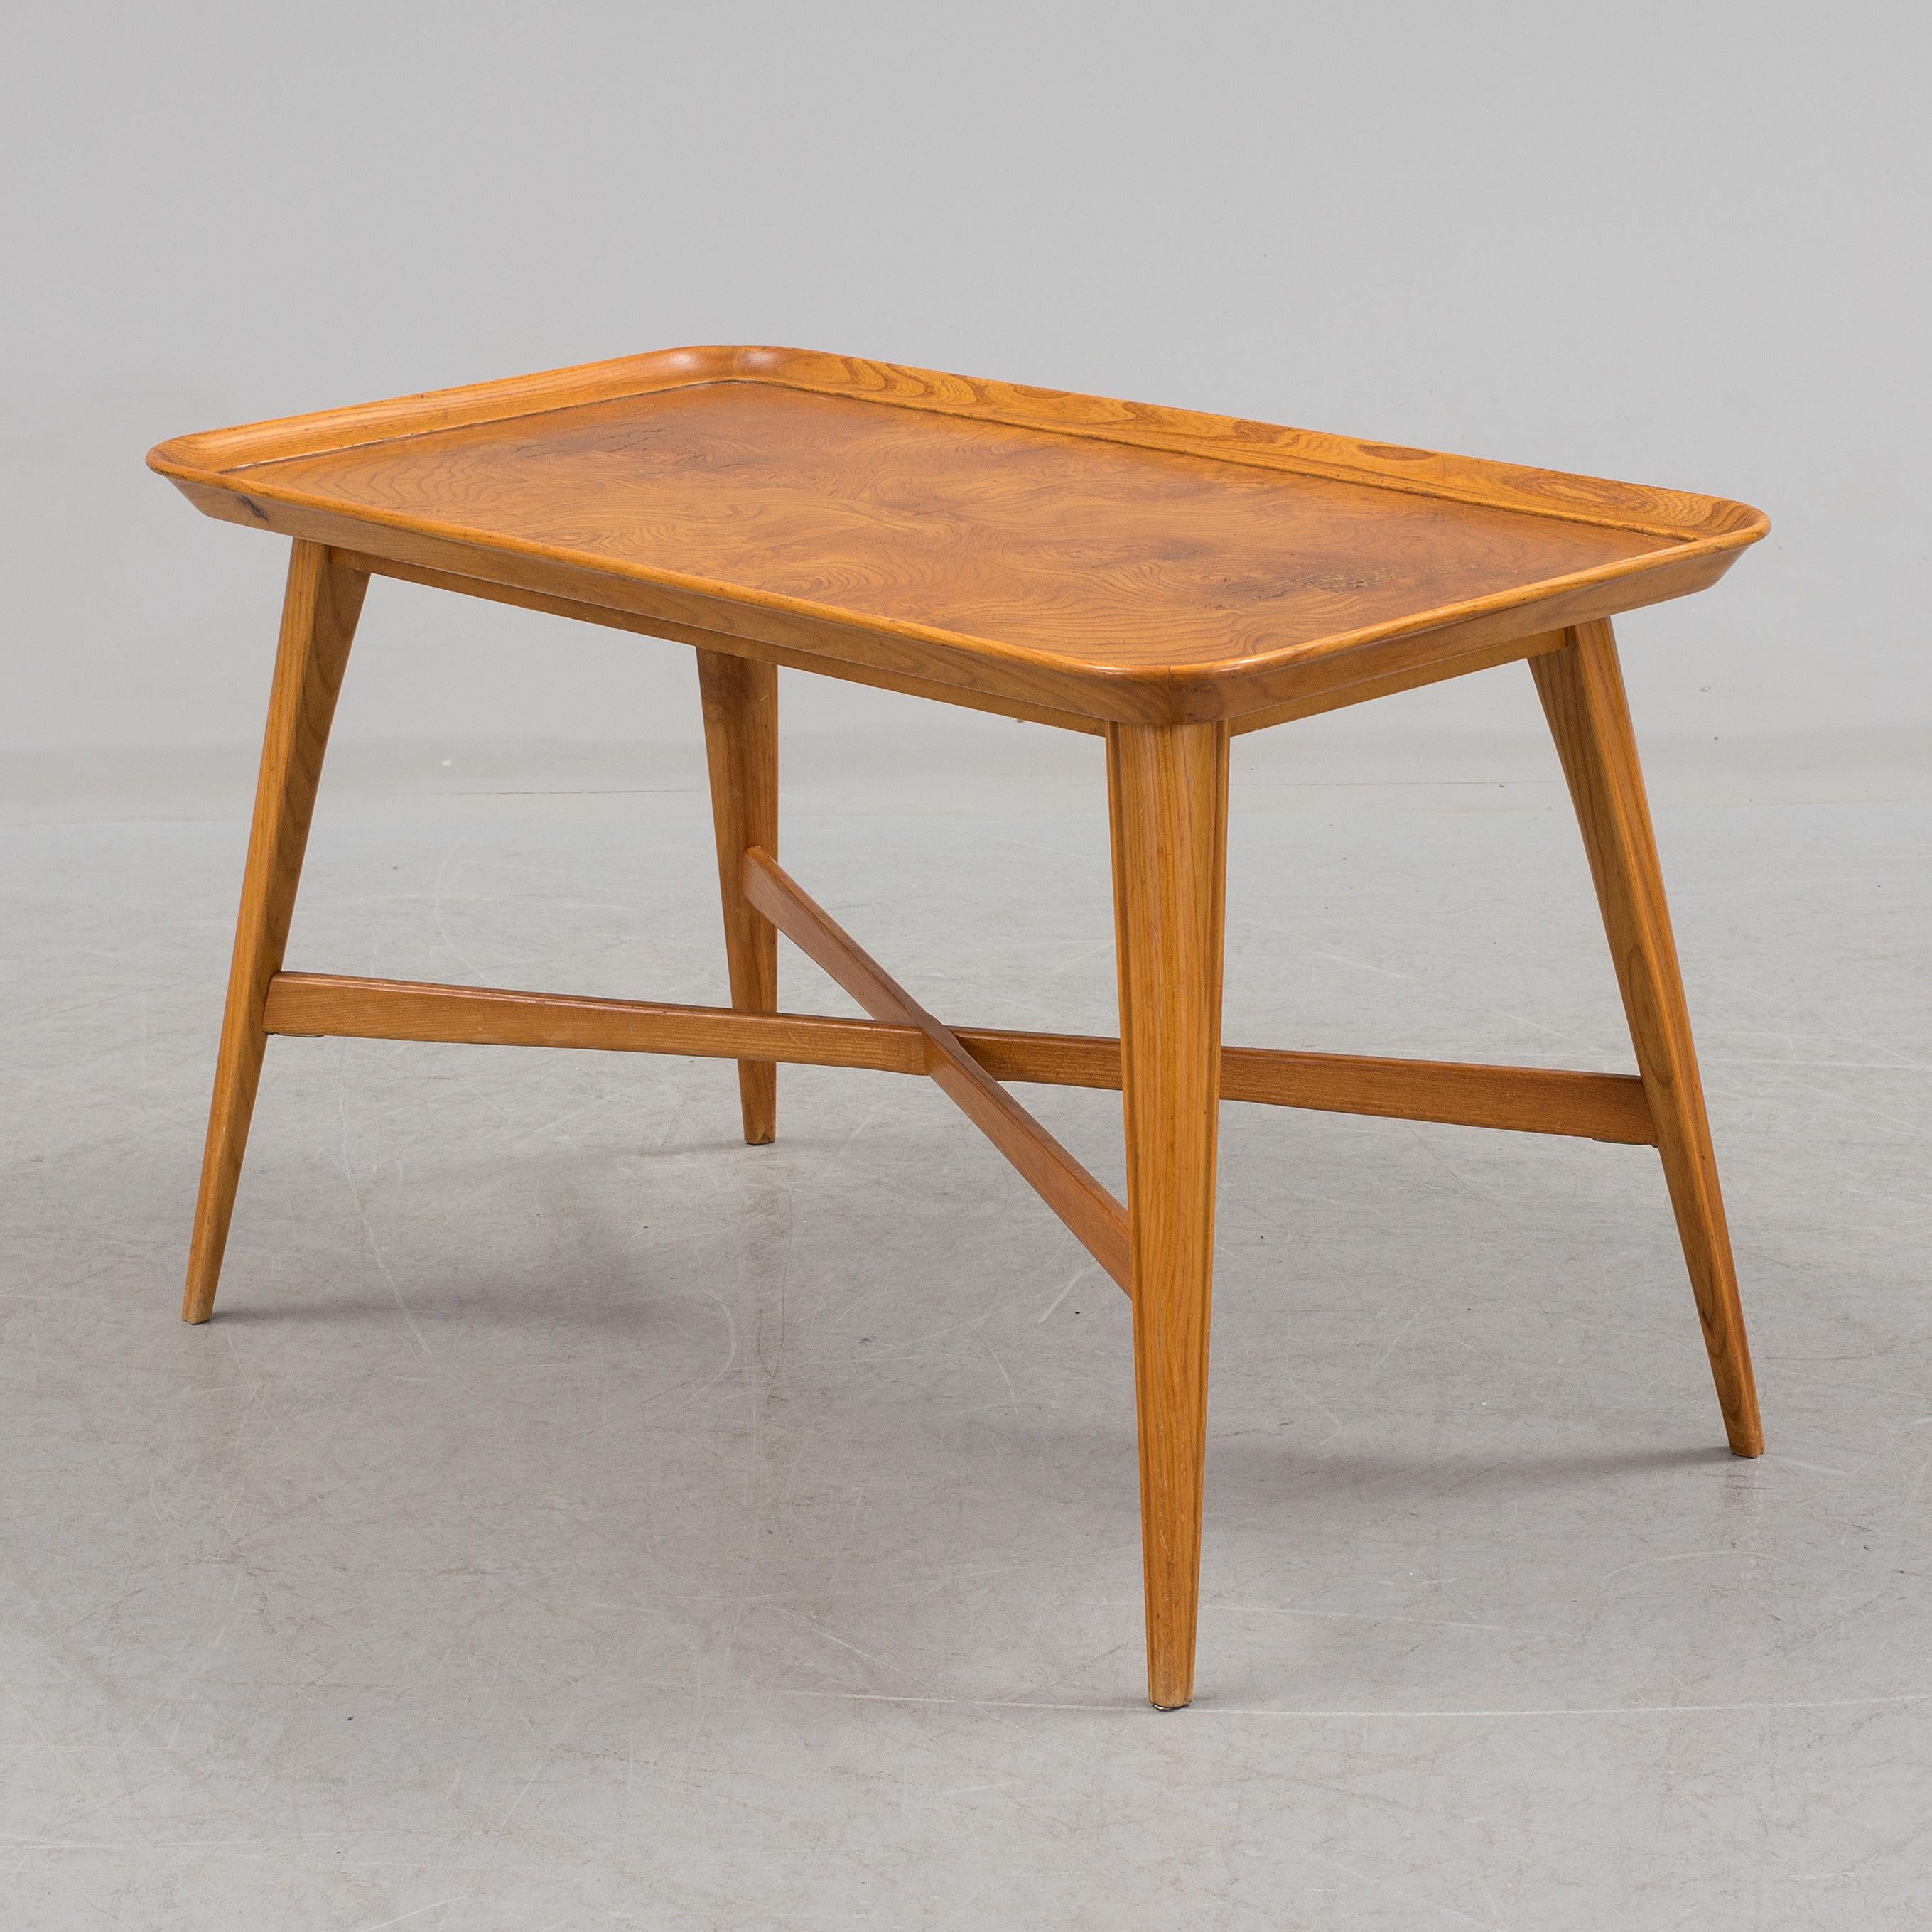 Elegant oak and birch low table Sweden, 1940
Good condition.